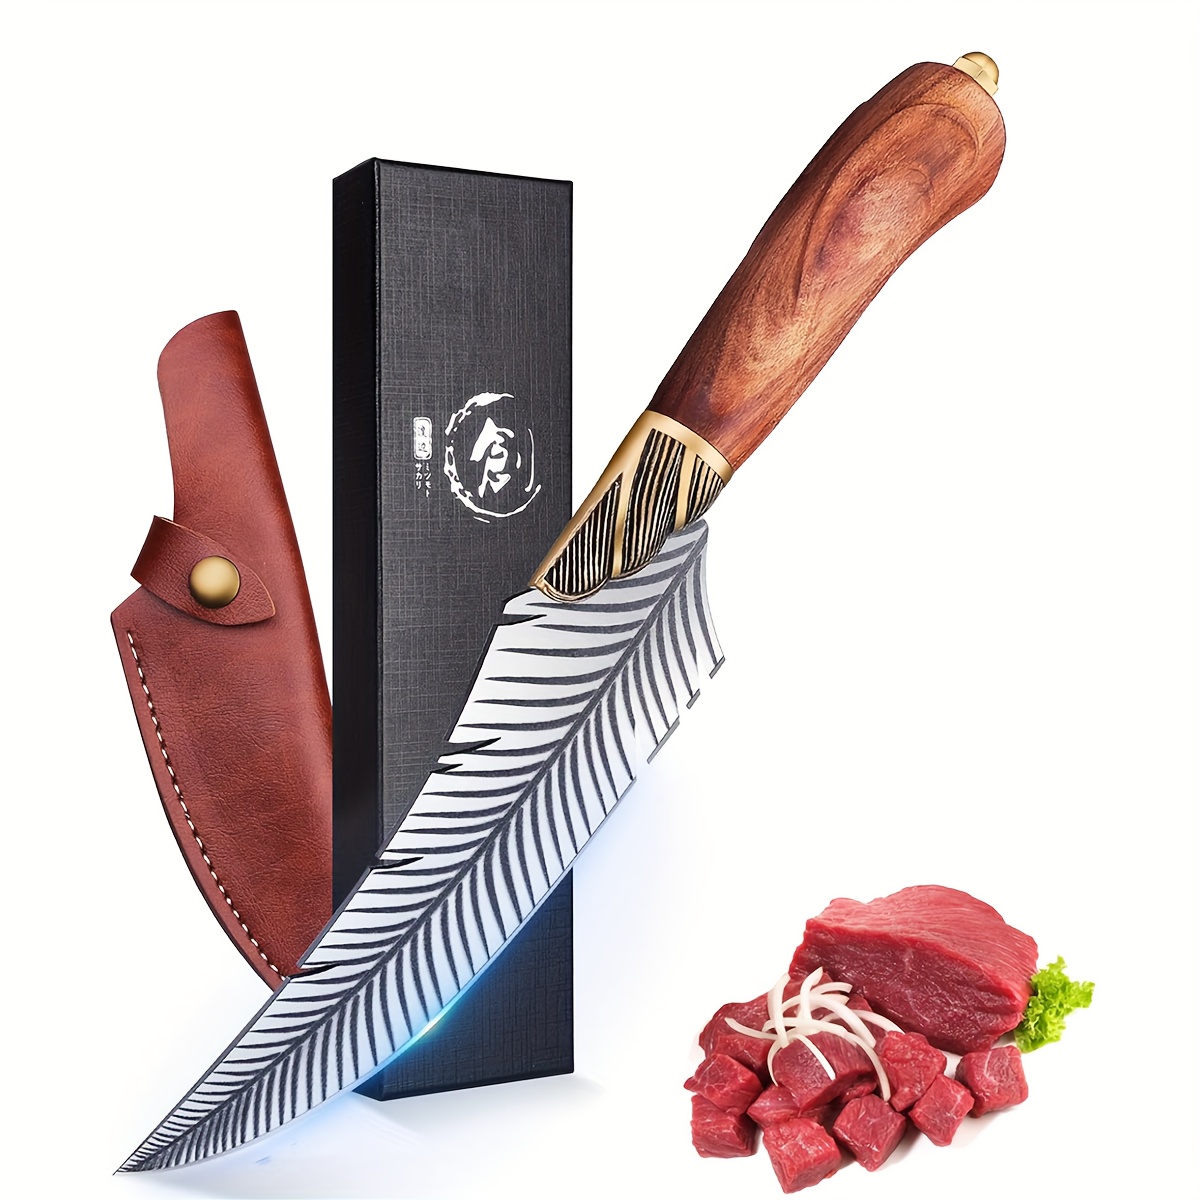 

Feather Viking Boning Knife, 6 Inch Professional Viking Knife Meat Cleaver Full Tang Forged Kitchen Cooking Knife With Sheath Gift Box For Outdoor Camping